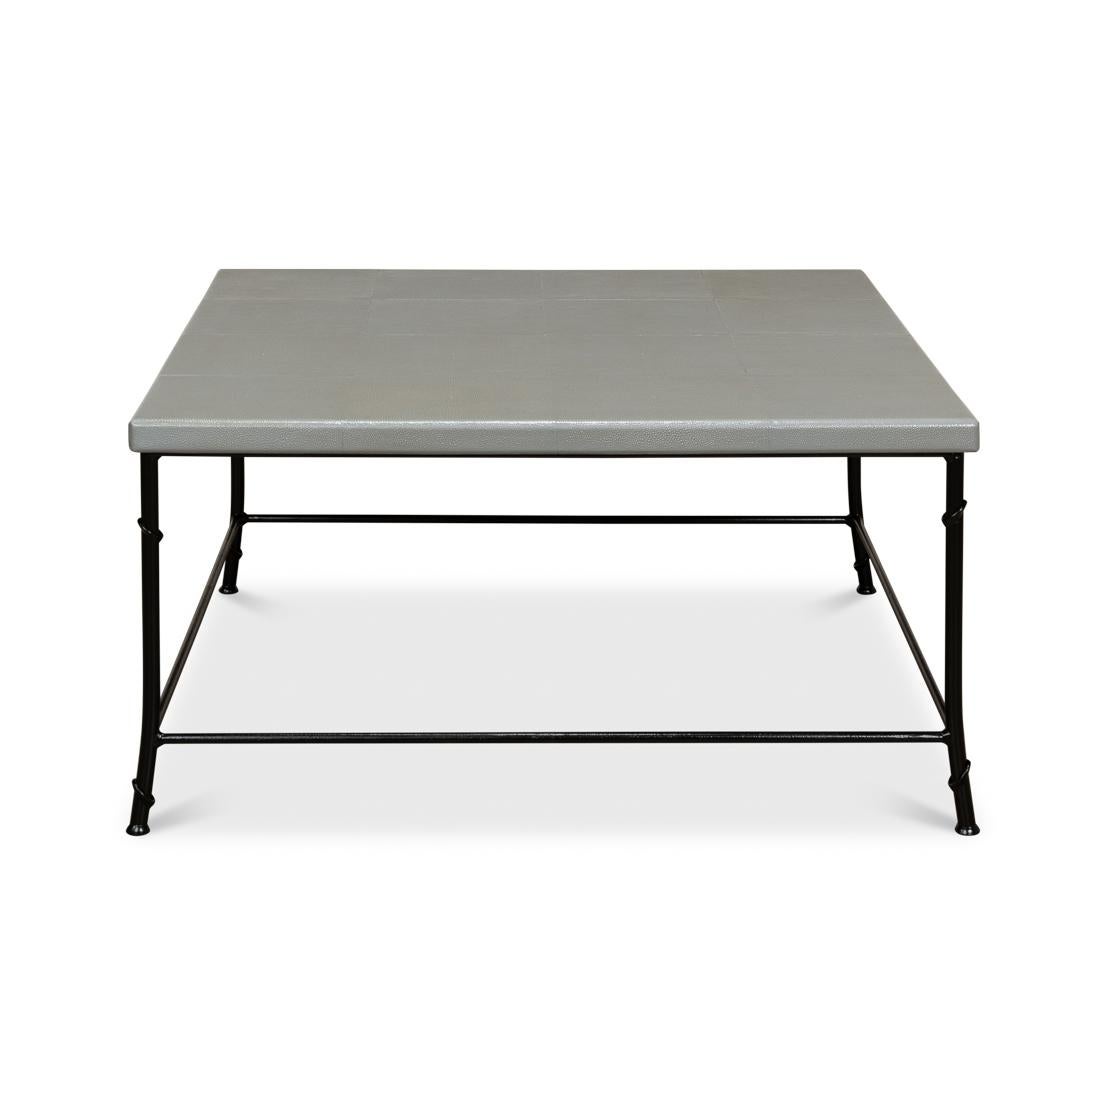 Featuring a sleek, square gray embossed leather top that exudes a chic, industrial vibe. The minimalist black natural-form frame adds an air of sophisticated simplicity, making it a versatile fit for any living space. 

The spacious top is perfect